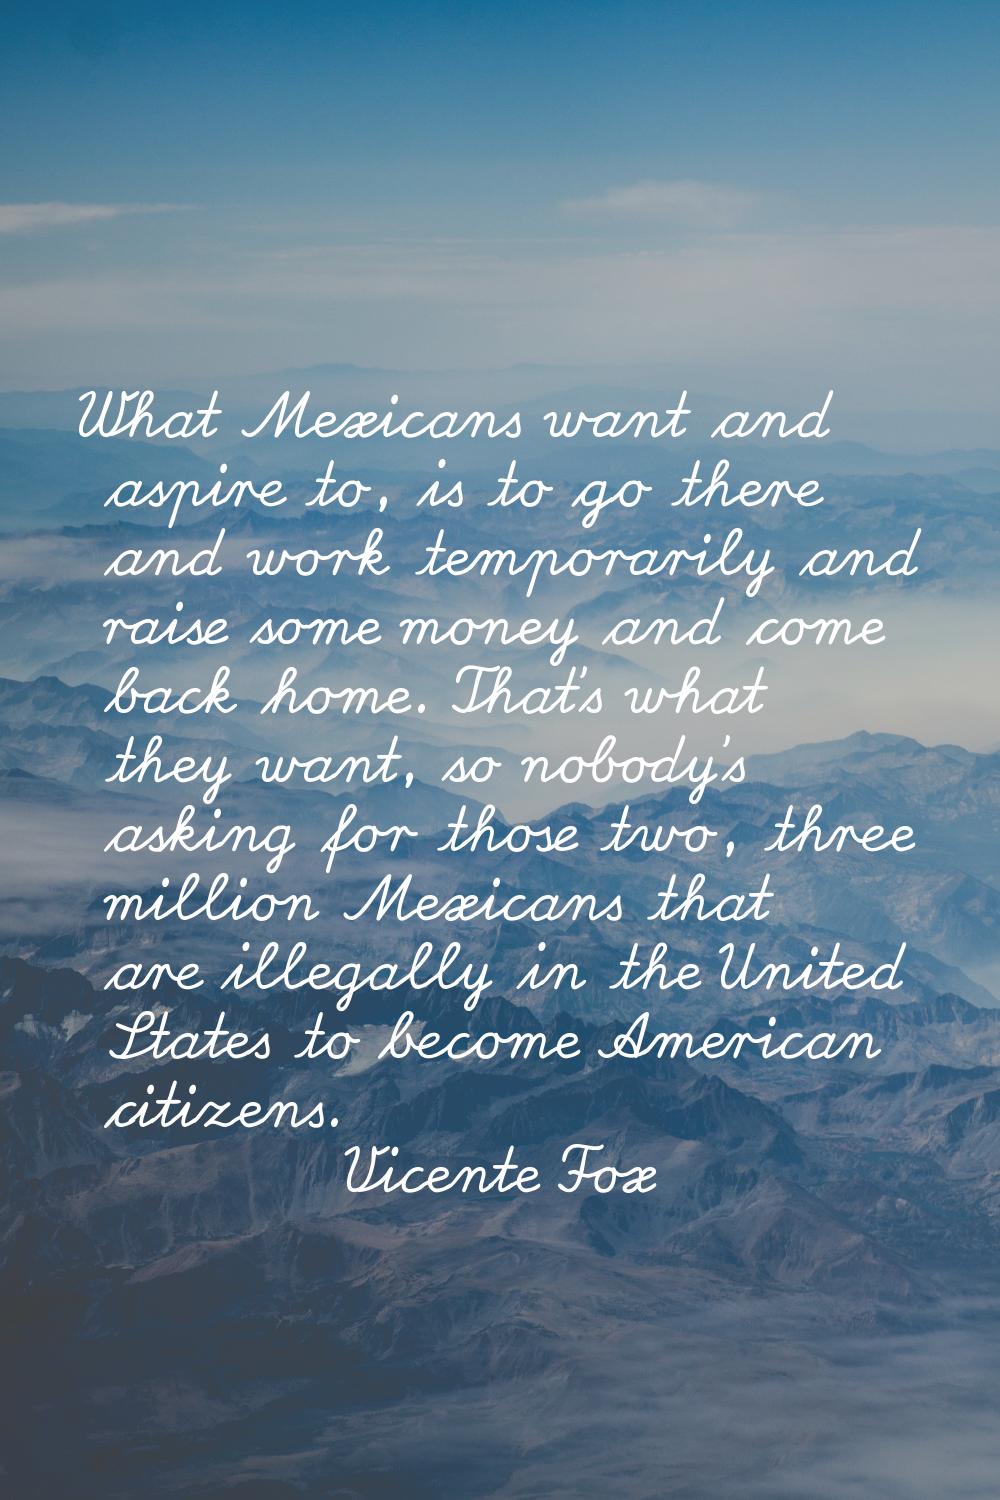 What Mexicans want and aspire to, is to go there and work temporarily and raise some money and come